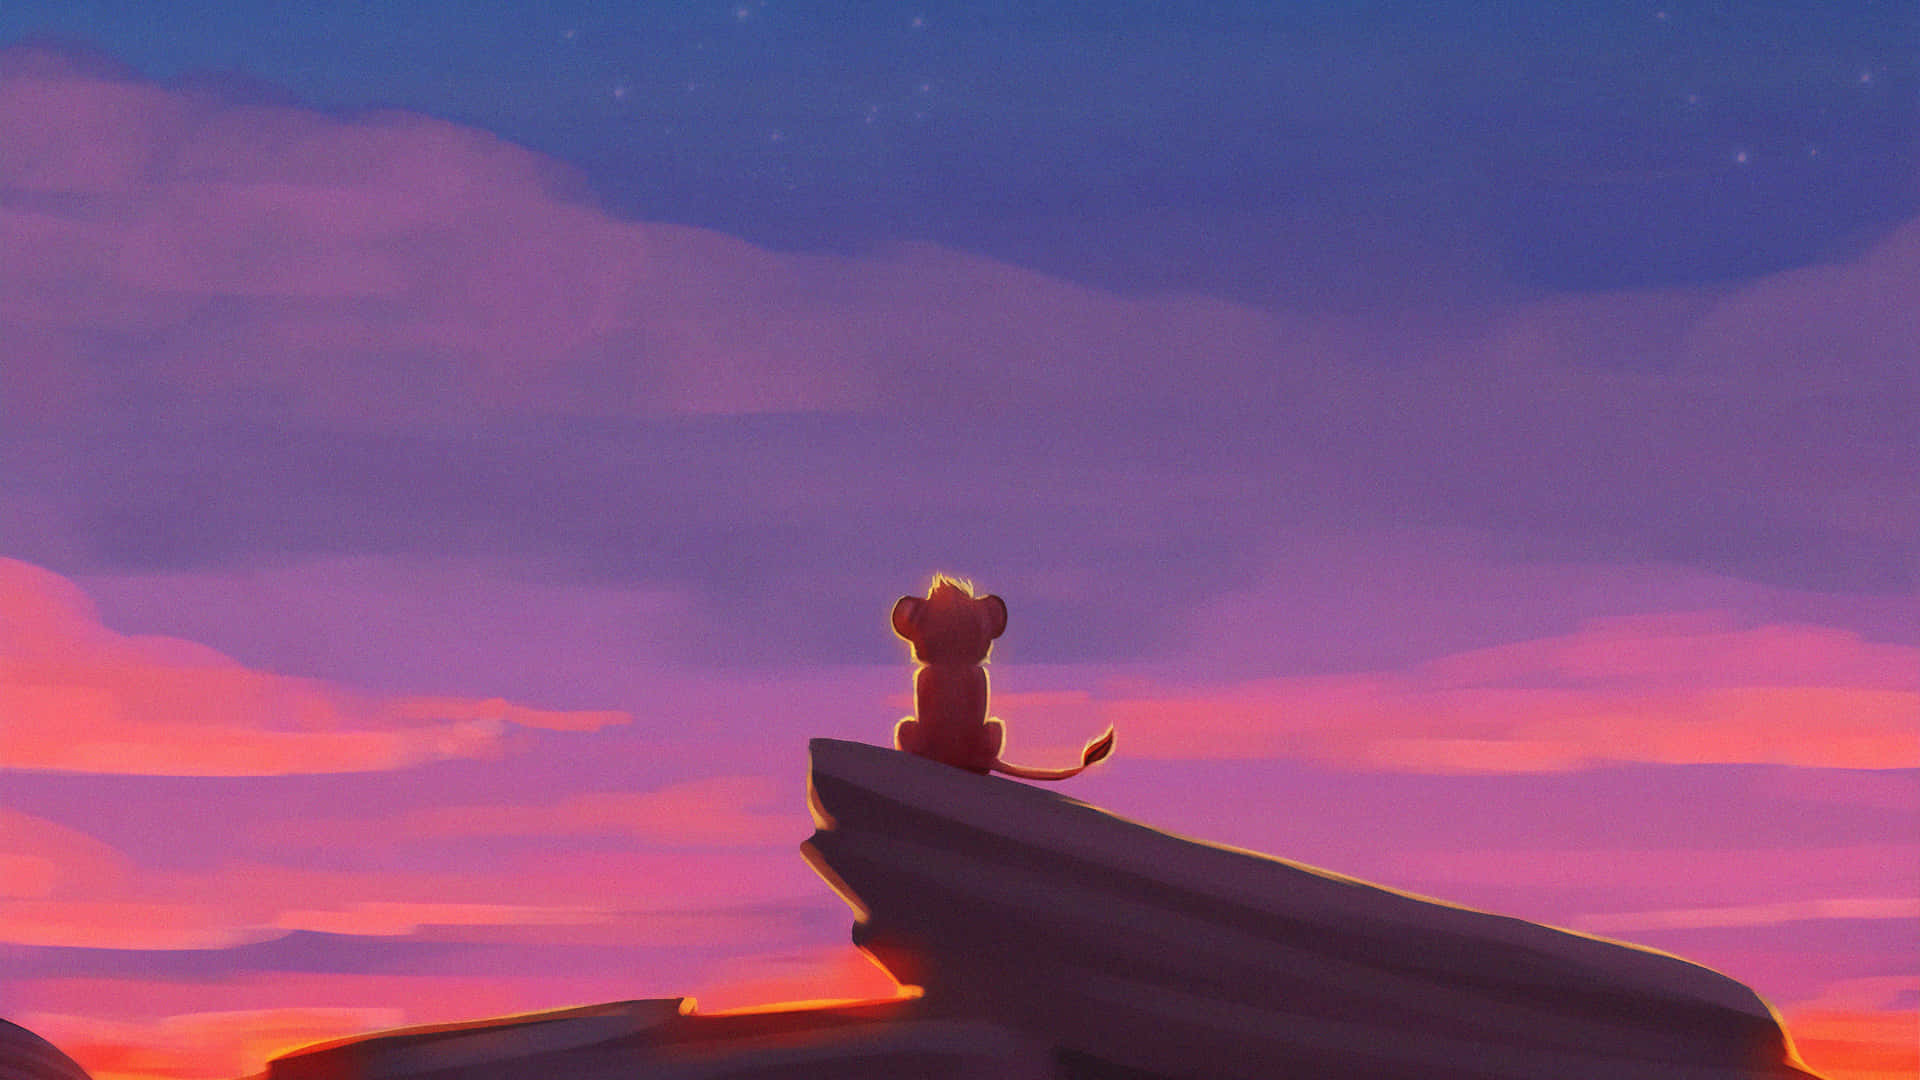 Majestic, beautiful and iconic; the Lion King and its legacy will remain timeless. Wallpaper